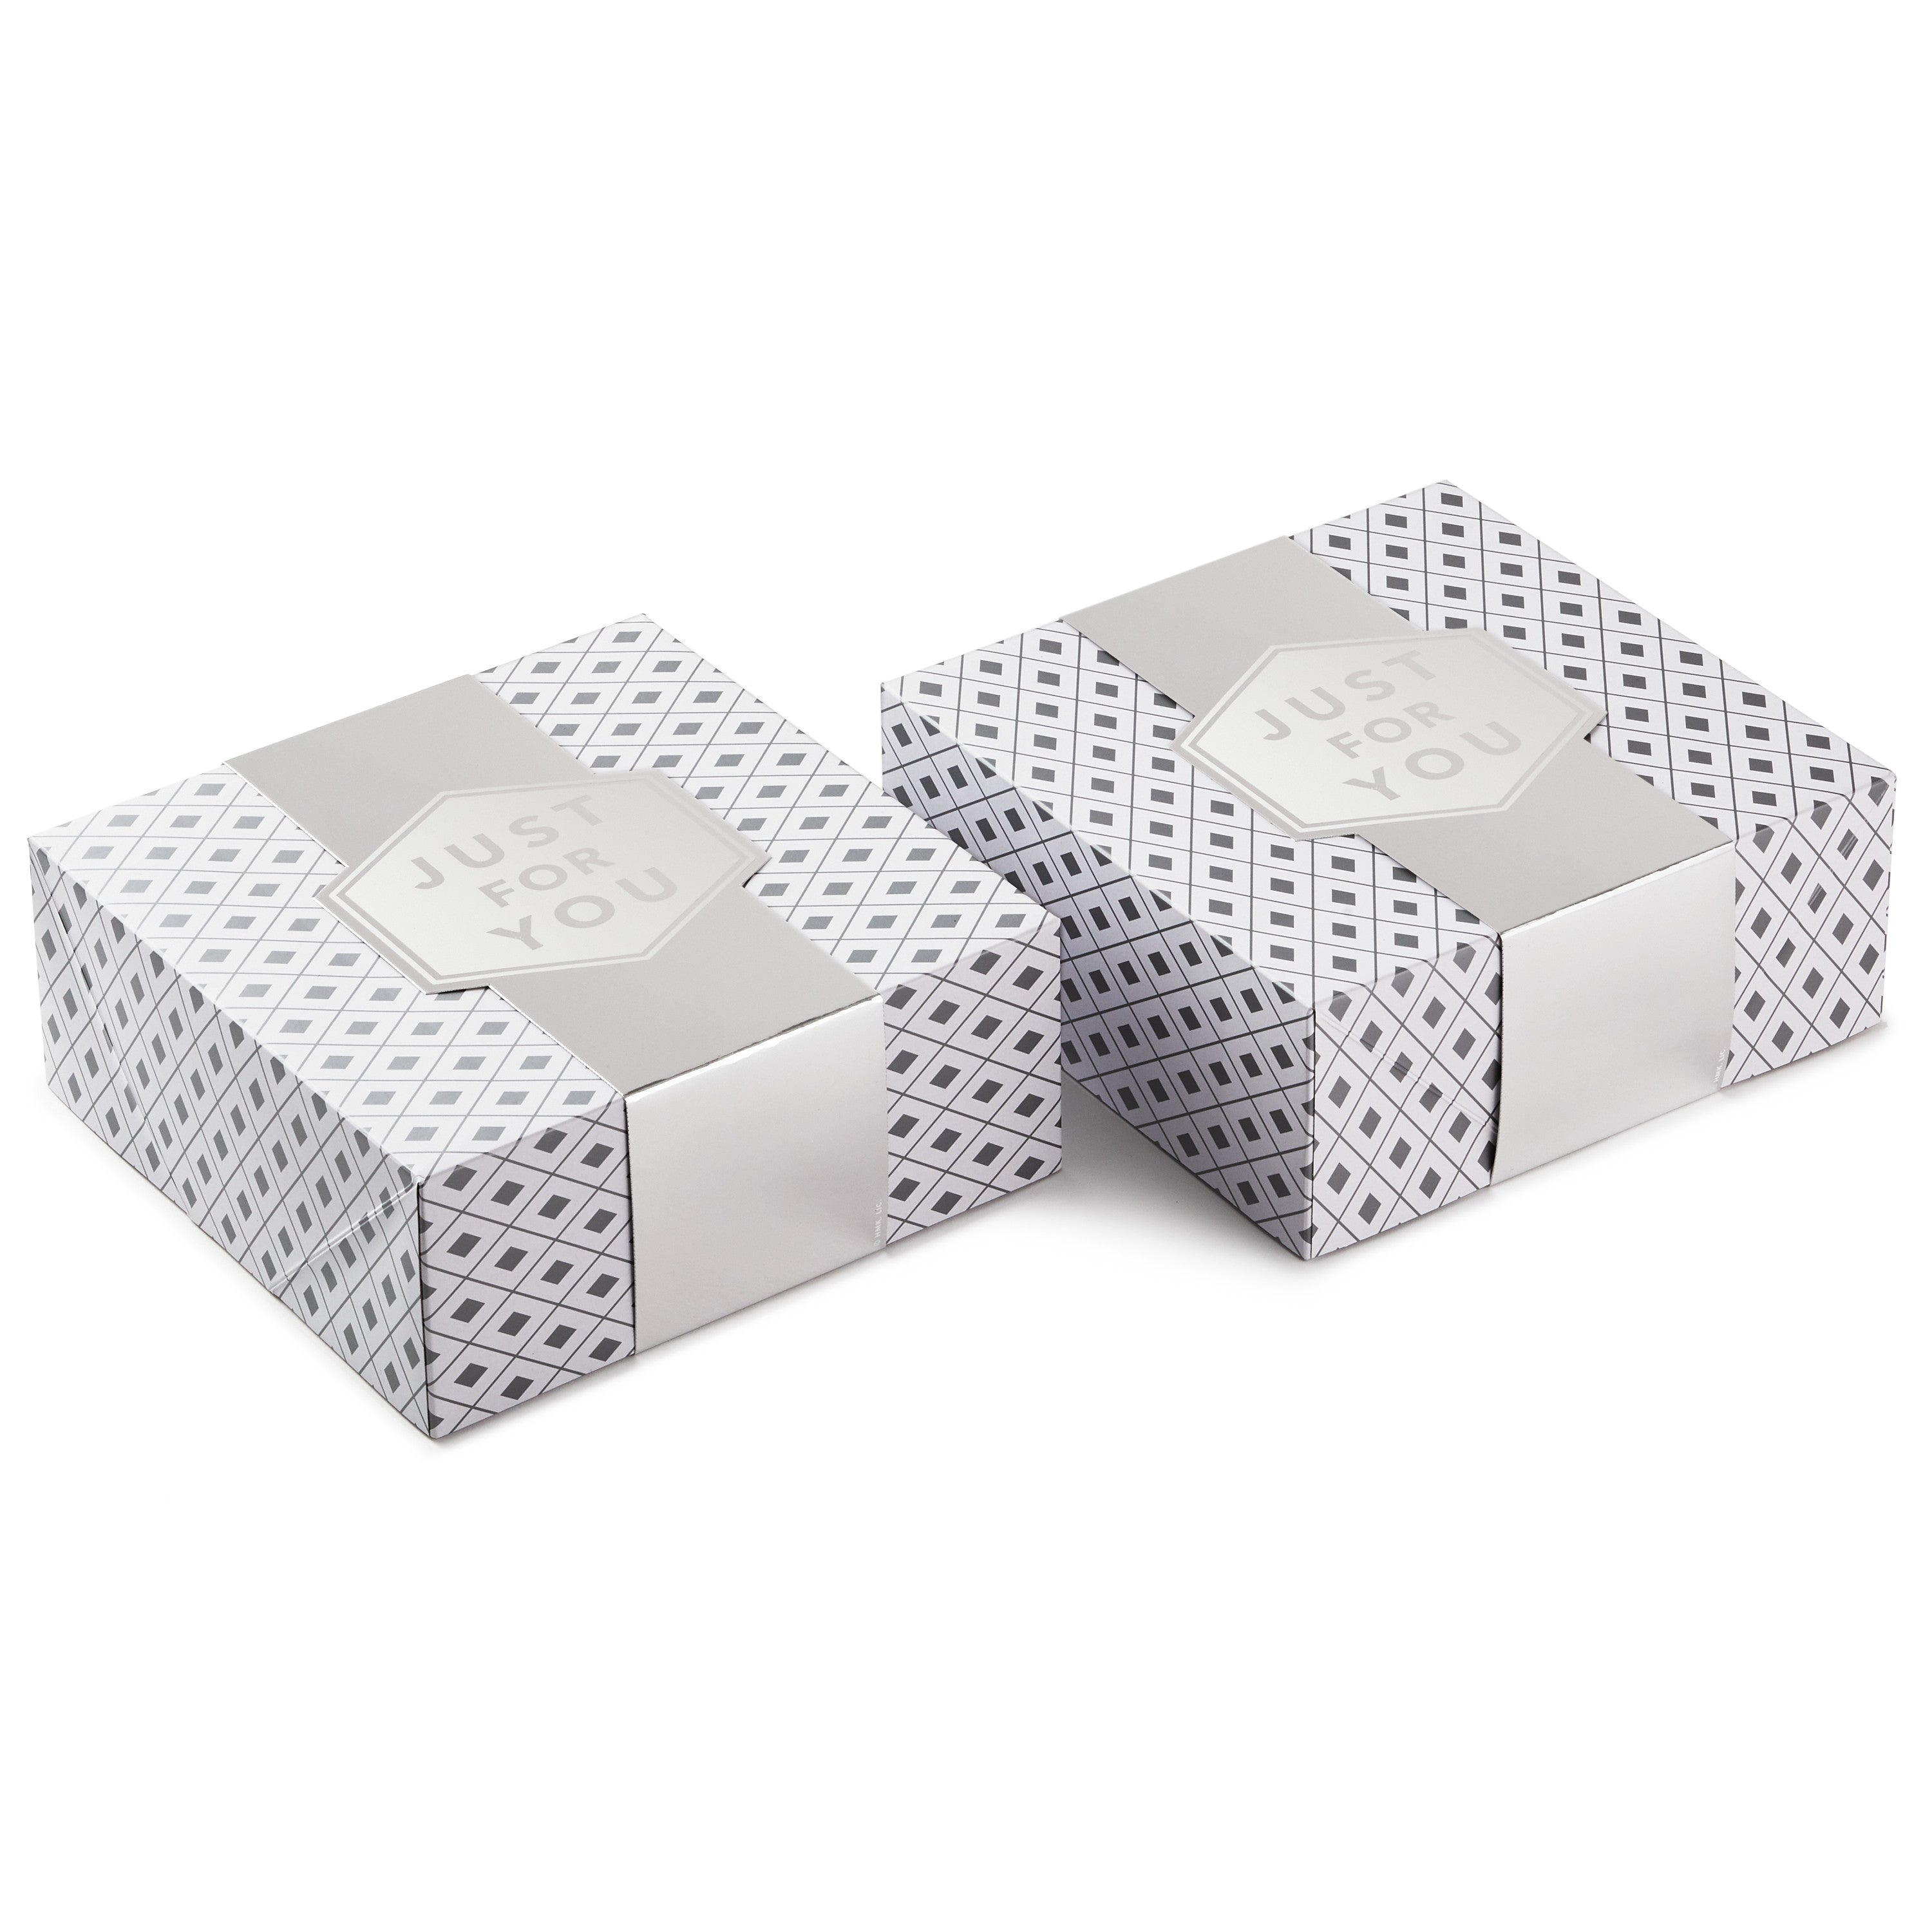 Hallmark 10" Large Gift Boxes with Wrap Bands (2-Pack: Silver and White, "Just For You") for Weddings, Graduations, Christmas, Valentine's Day, Birthdays